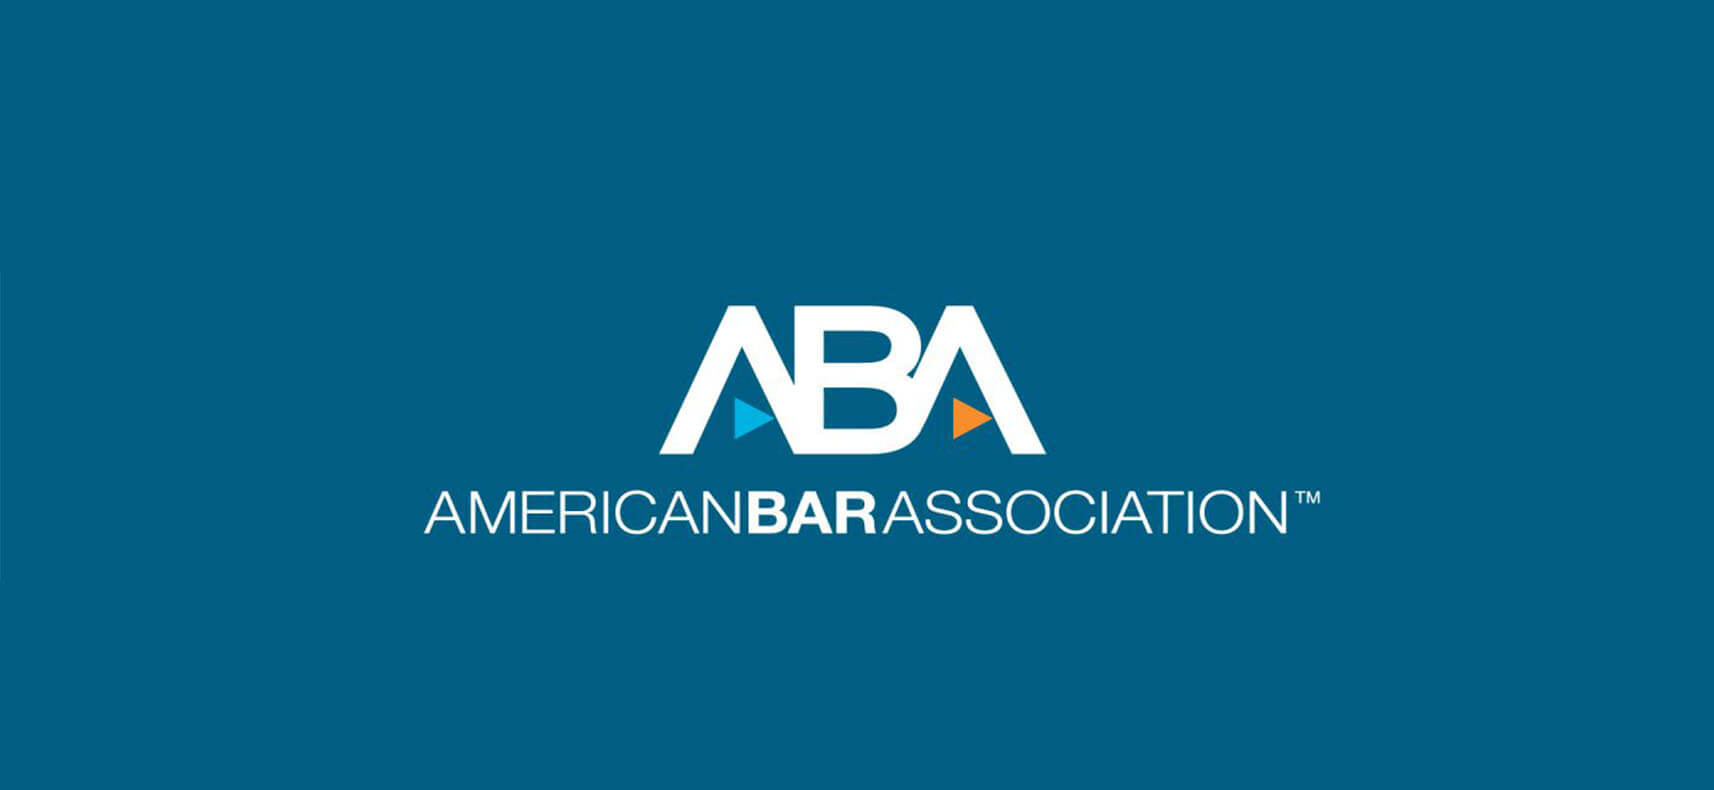 BCL's Richard Sallybanks attends ABA Tenth Annual London White Collar